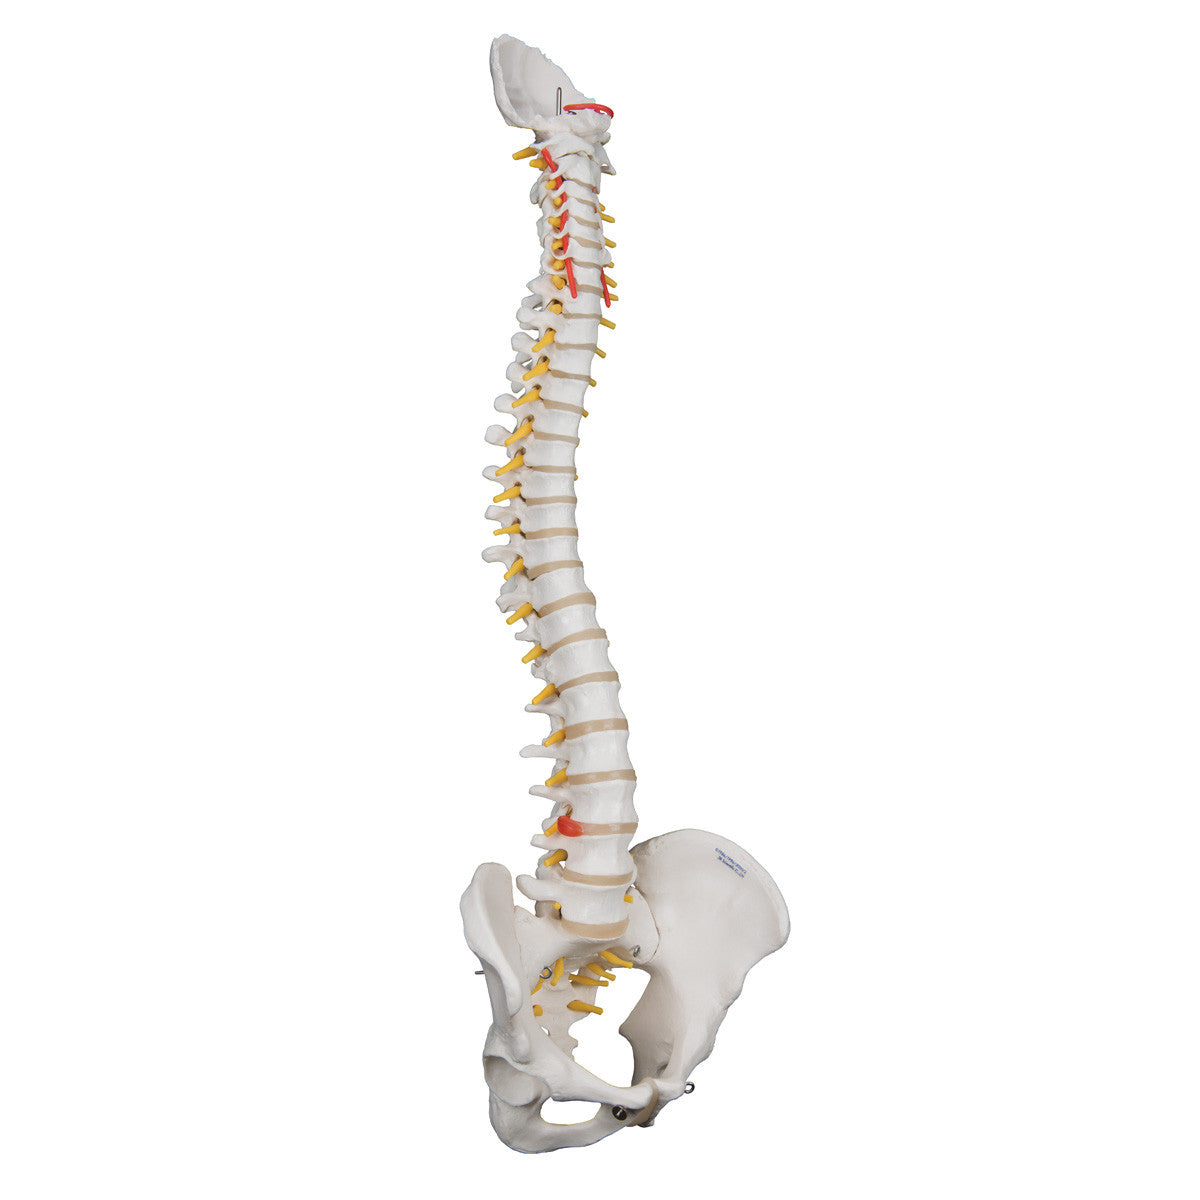 a59-1_02_1200_1200_highly-flexible-human-spine-model-mounted-on-a-flexible-core-3b-smart-anatomy__73257.1589752959.1280.1280.jpg